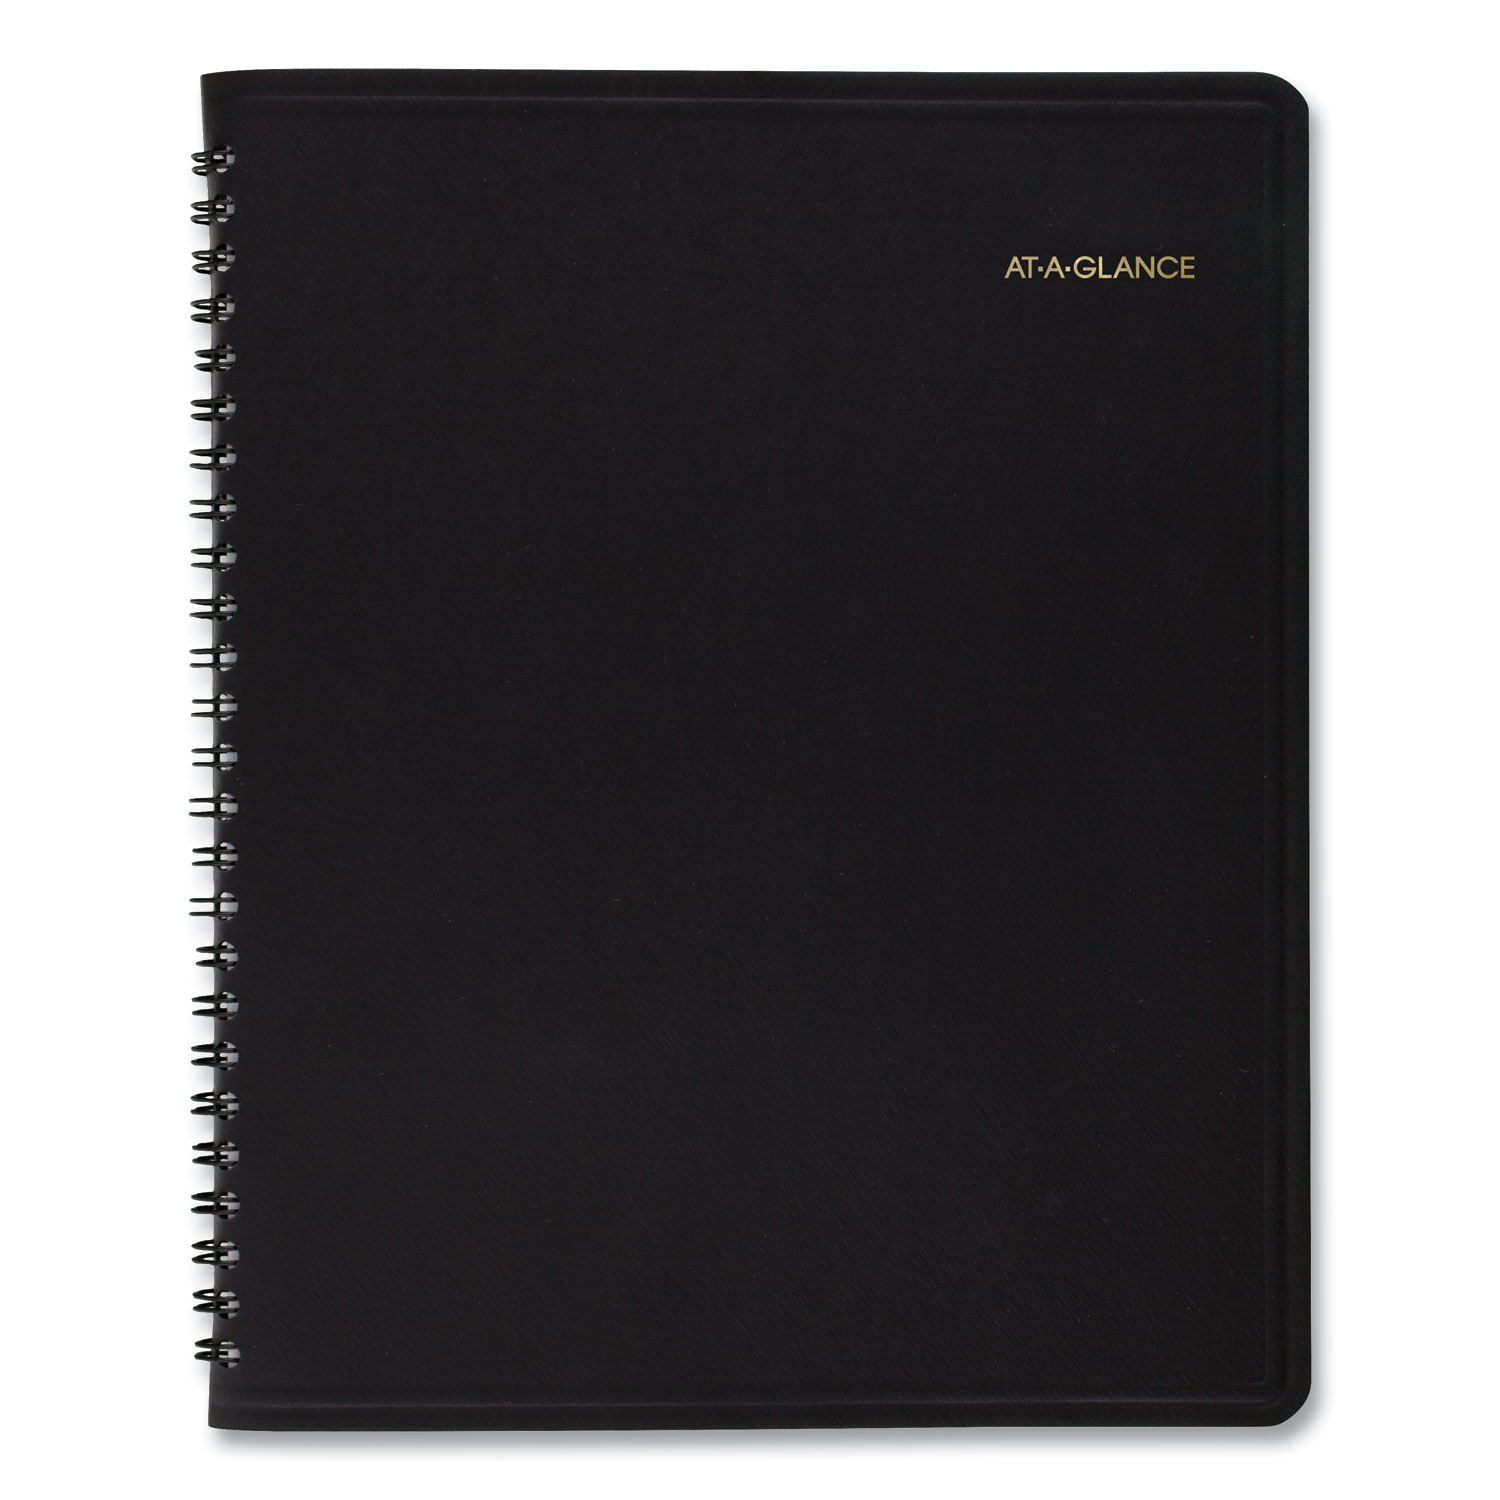  AT-A-GLANCE 7082405 24-Hour Daily Appointment Book, 8 3/4 x 6 7/8, White, 2020 (AAG7082405) 